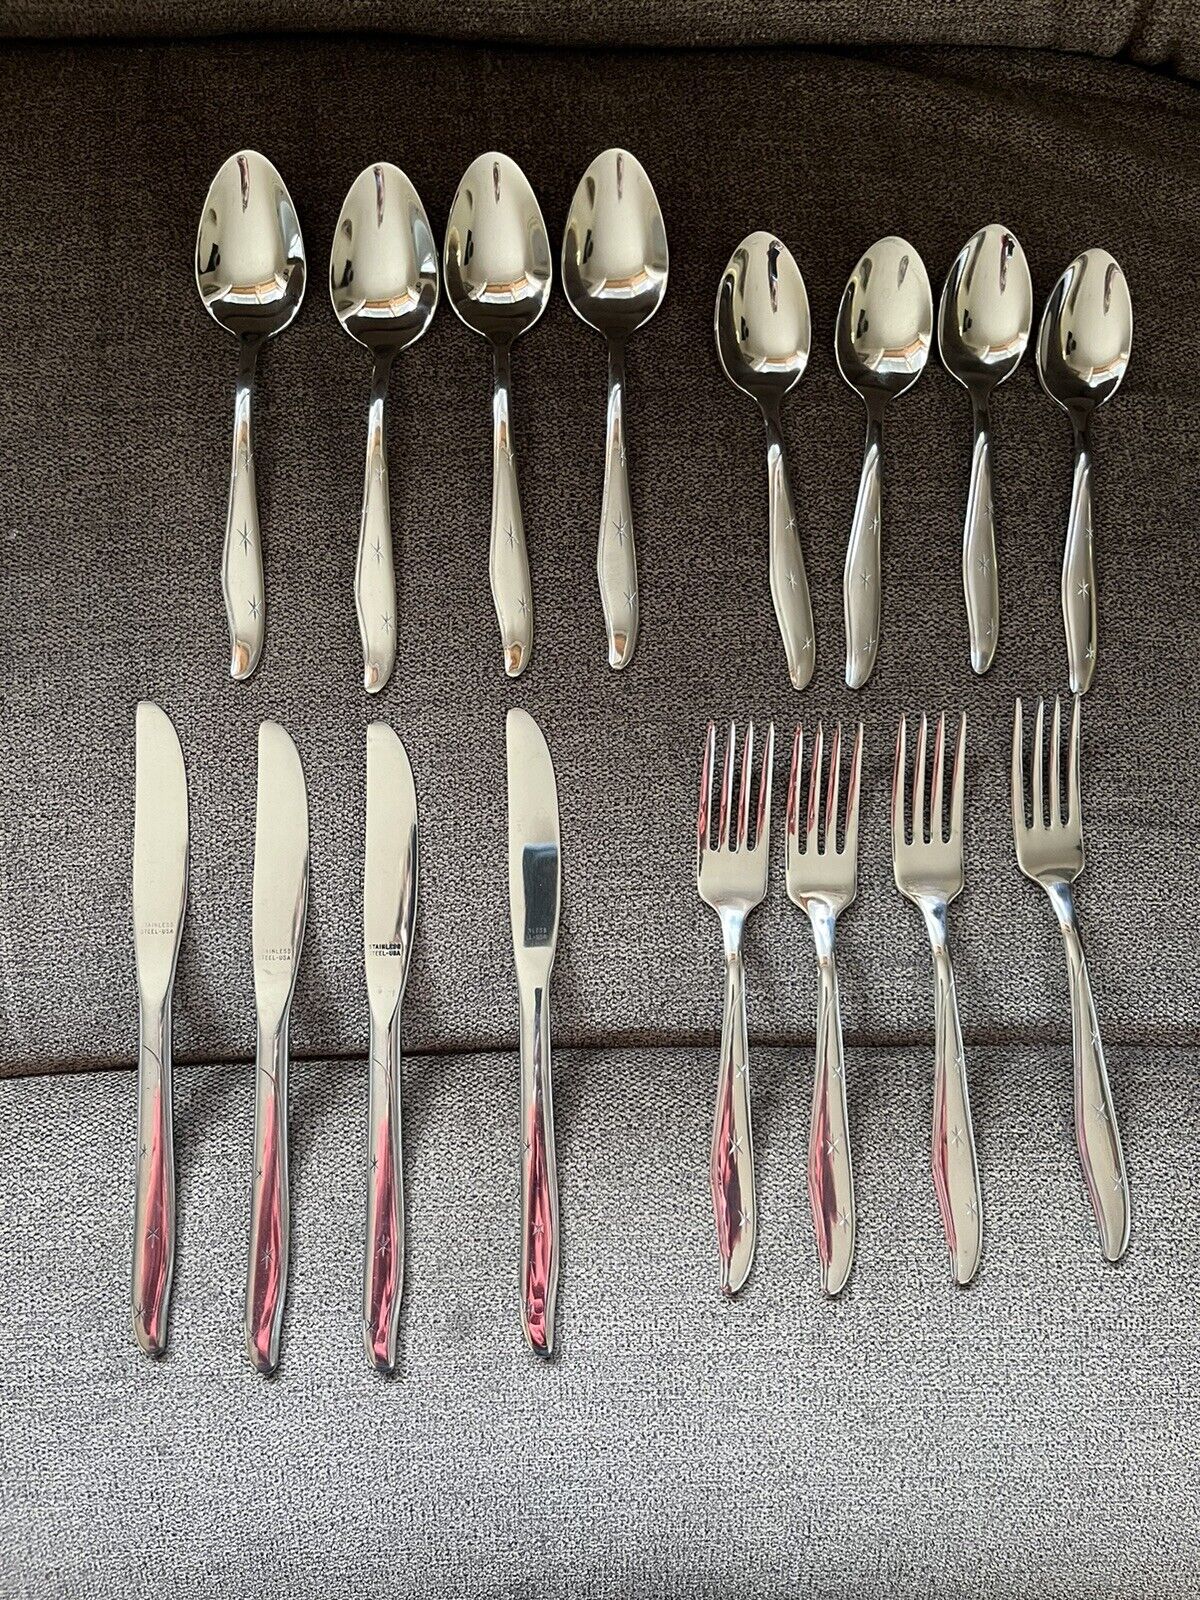 Mar-crest  MCM Atomic Starburst Stainless Silverware 4 Place Settings 16pc